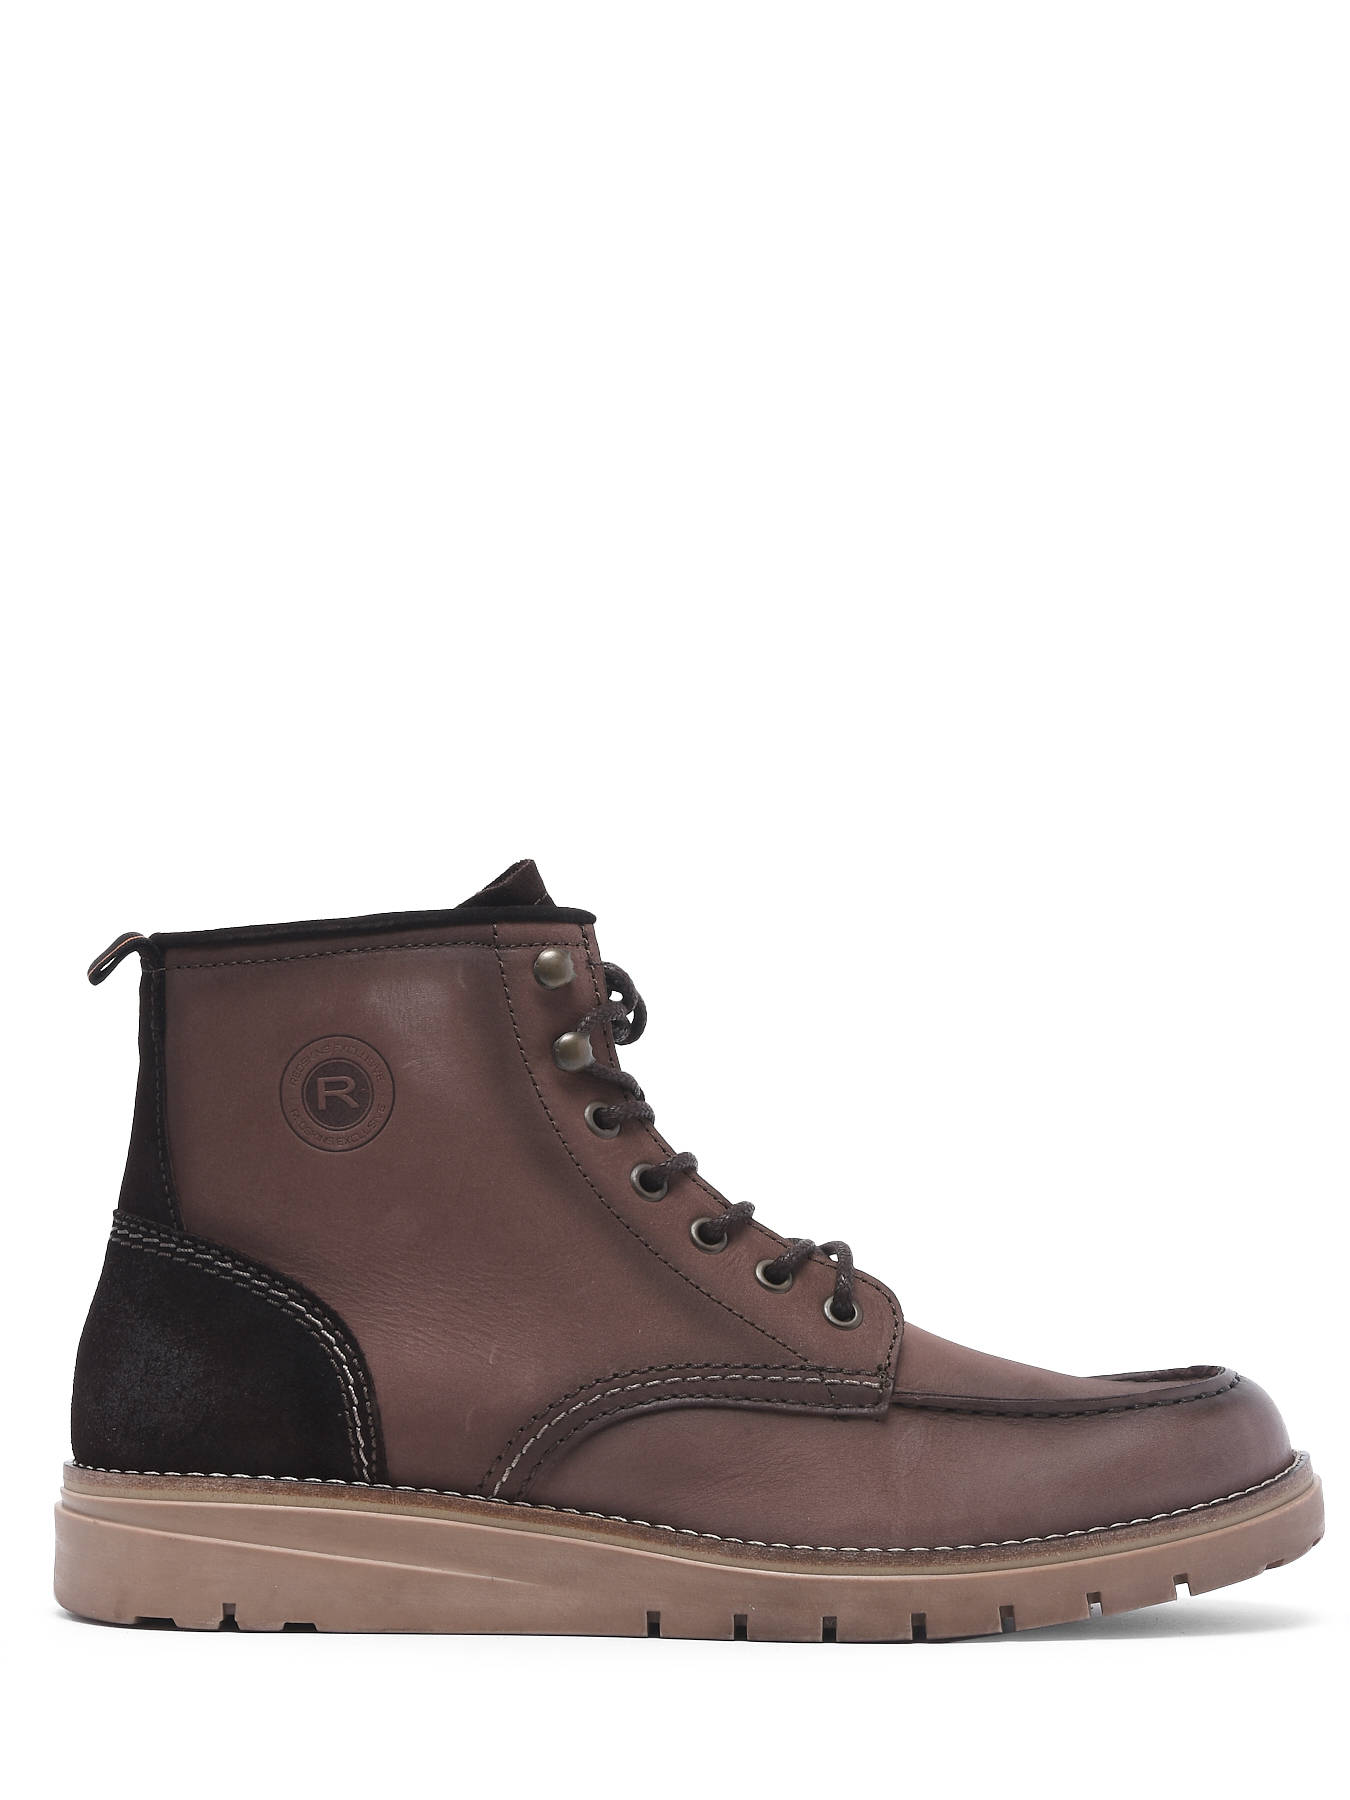 Redskins Boots DIFFERENT - best prices